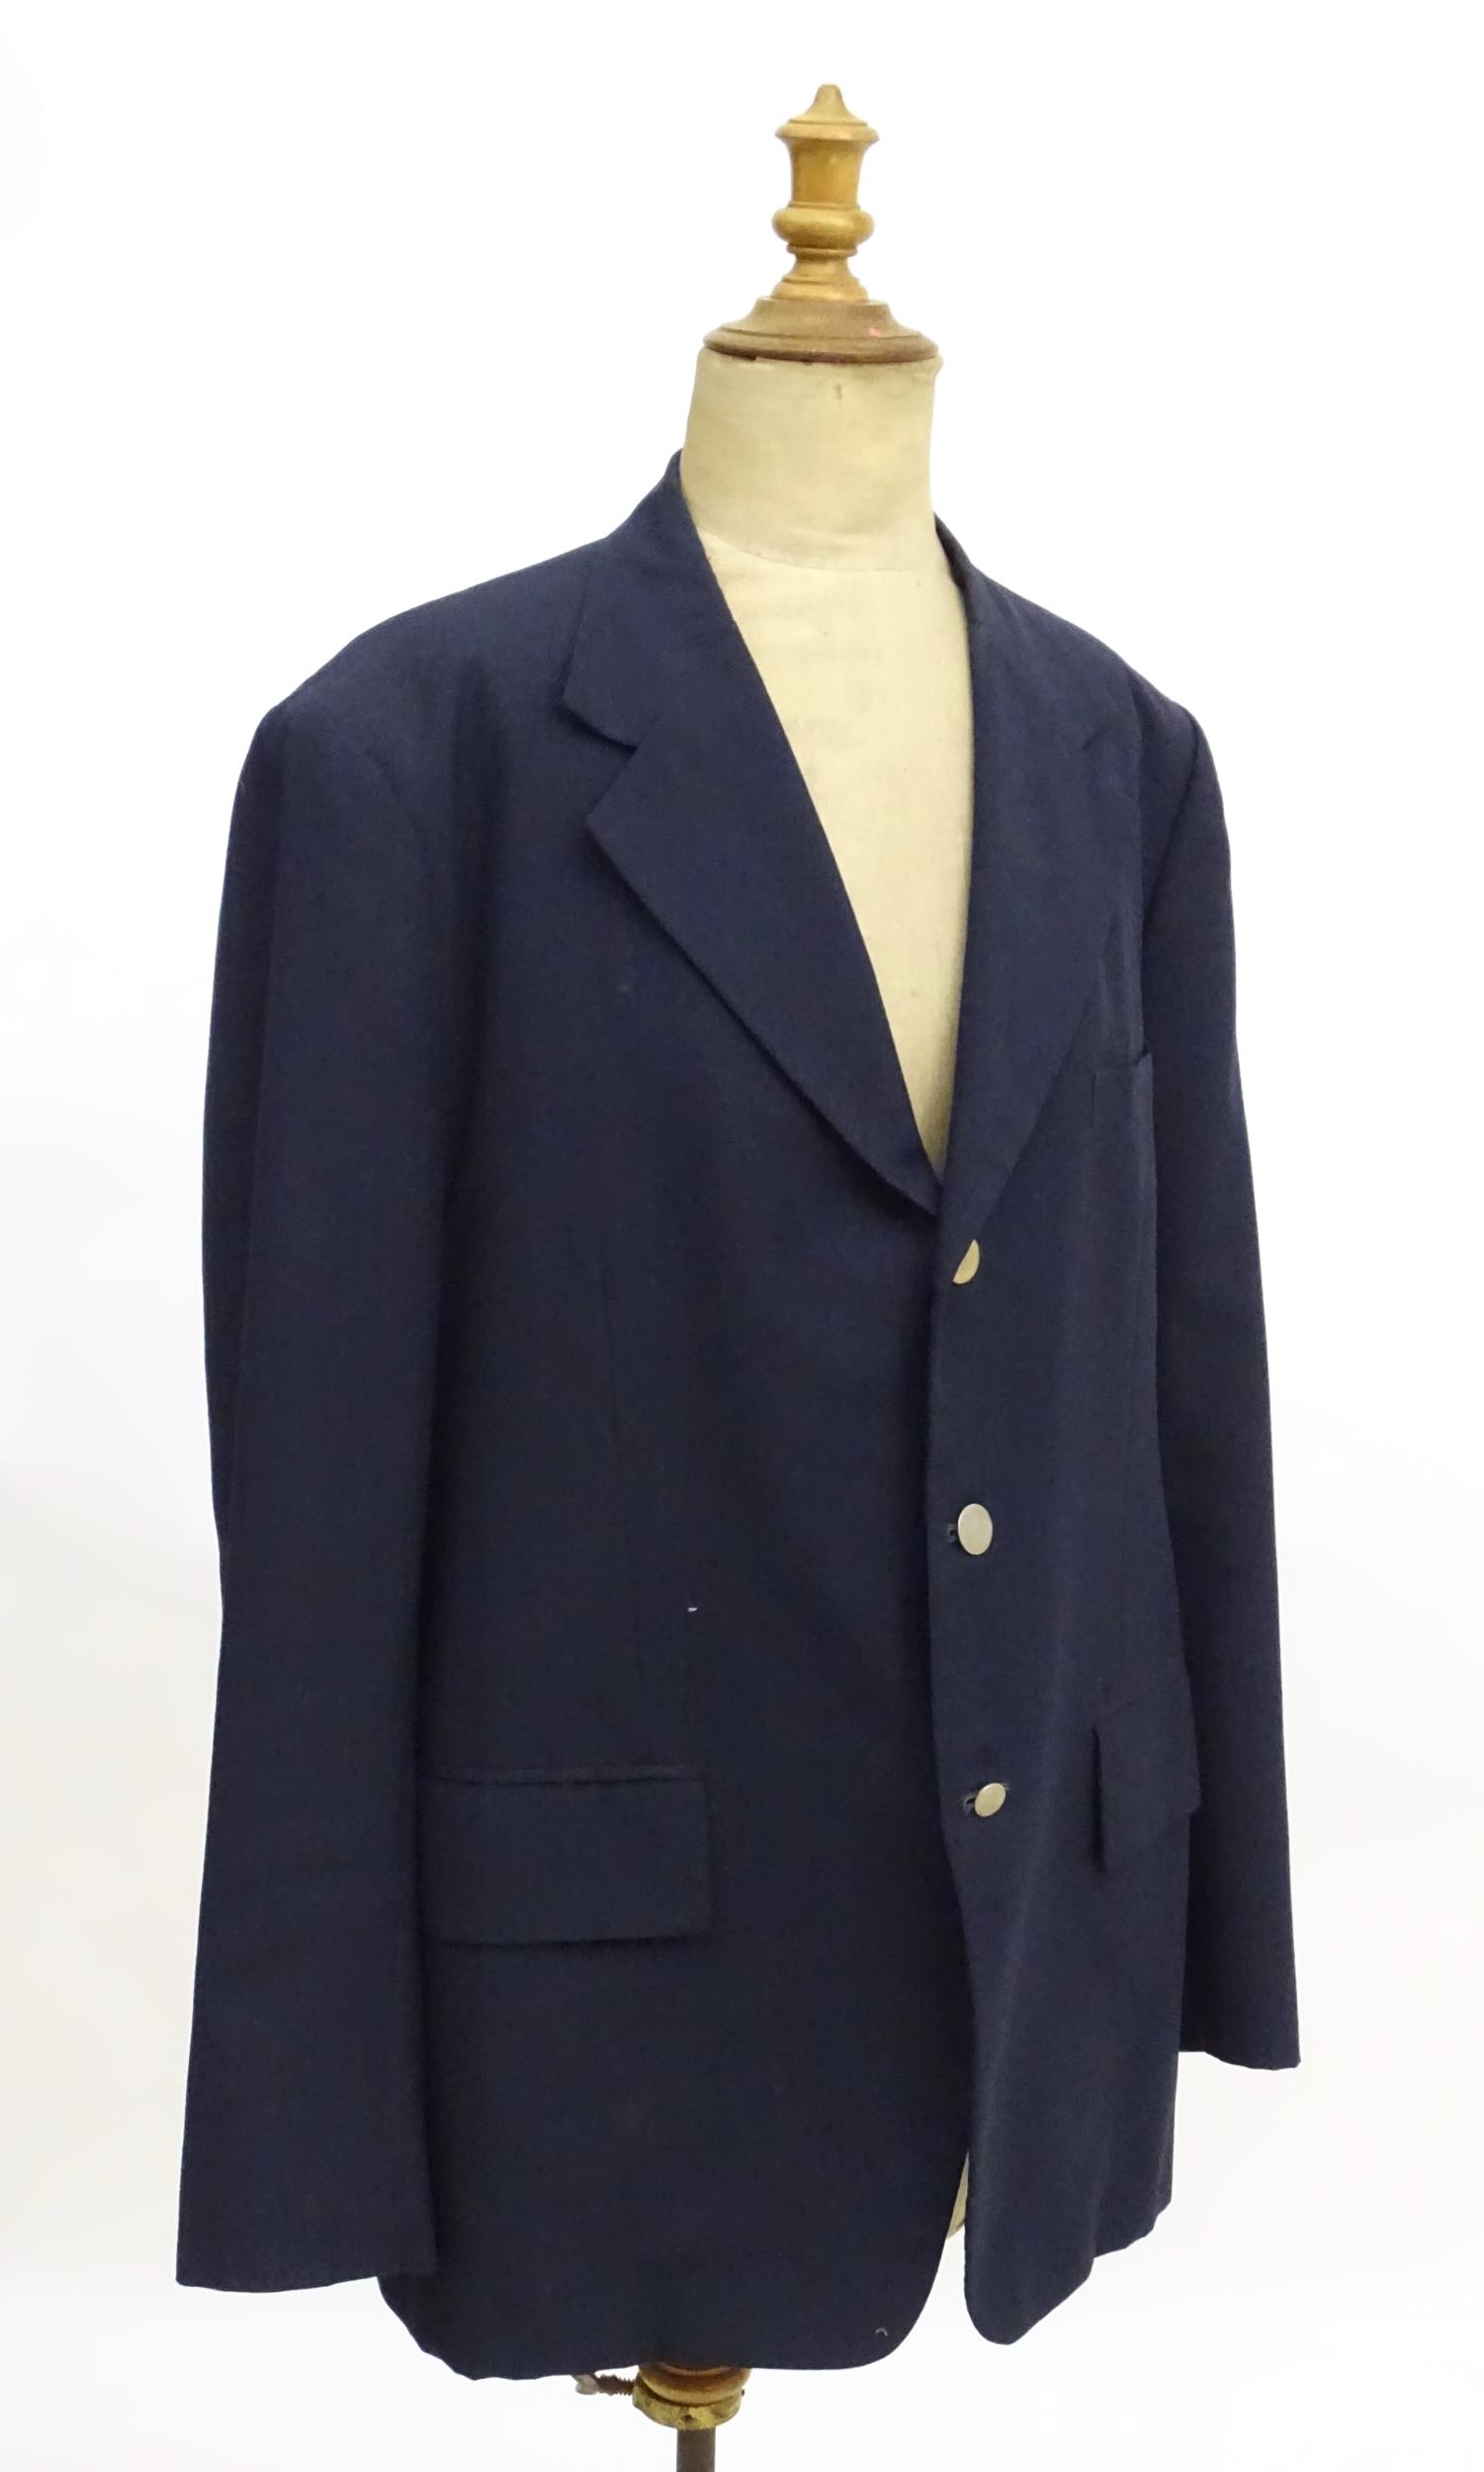 A navy blue bespoke suit with tapered trousers and metal button detail by 'Sam's Tailor' based in - Image 7 of 17